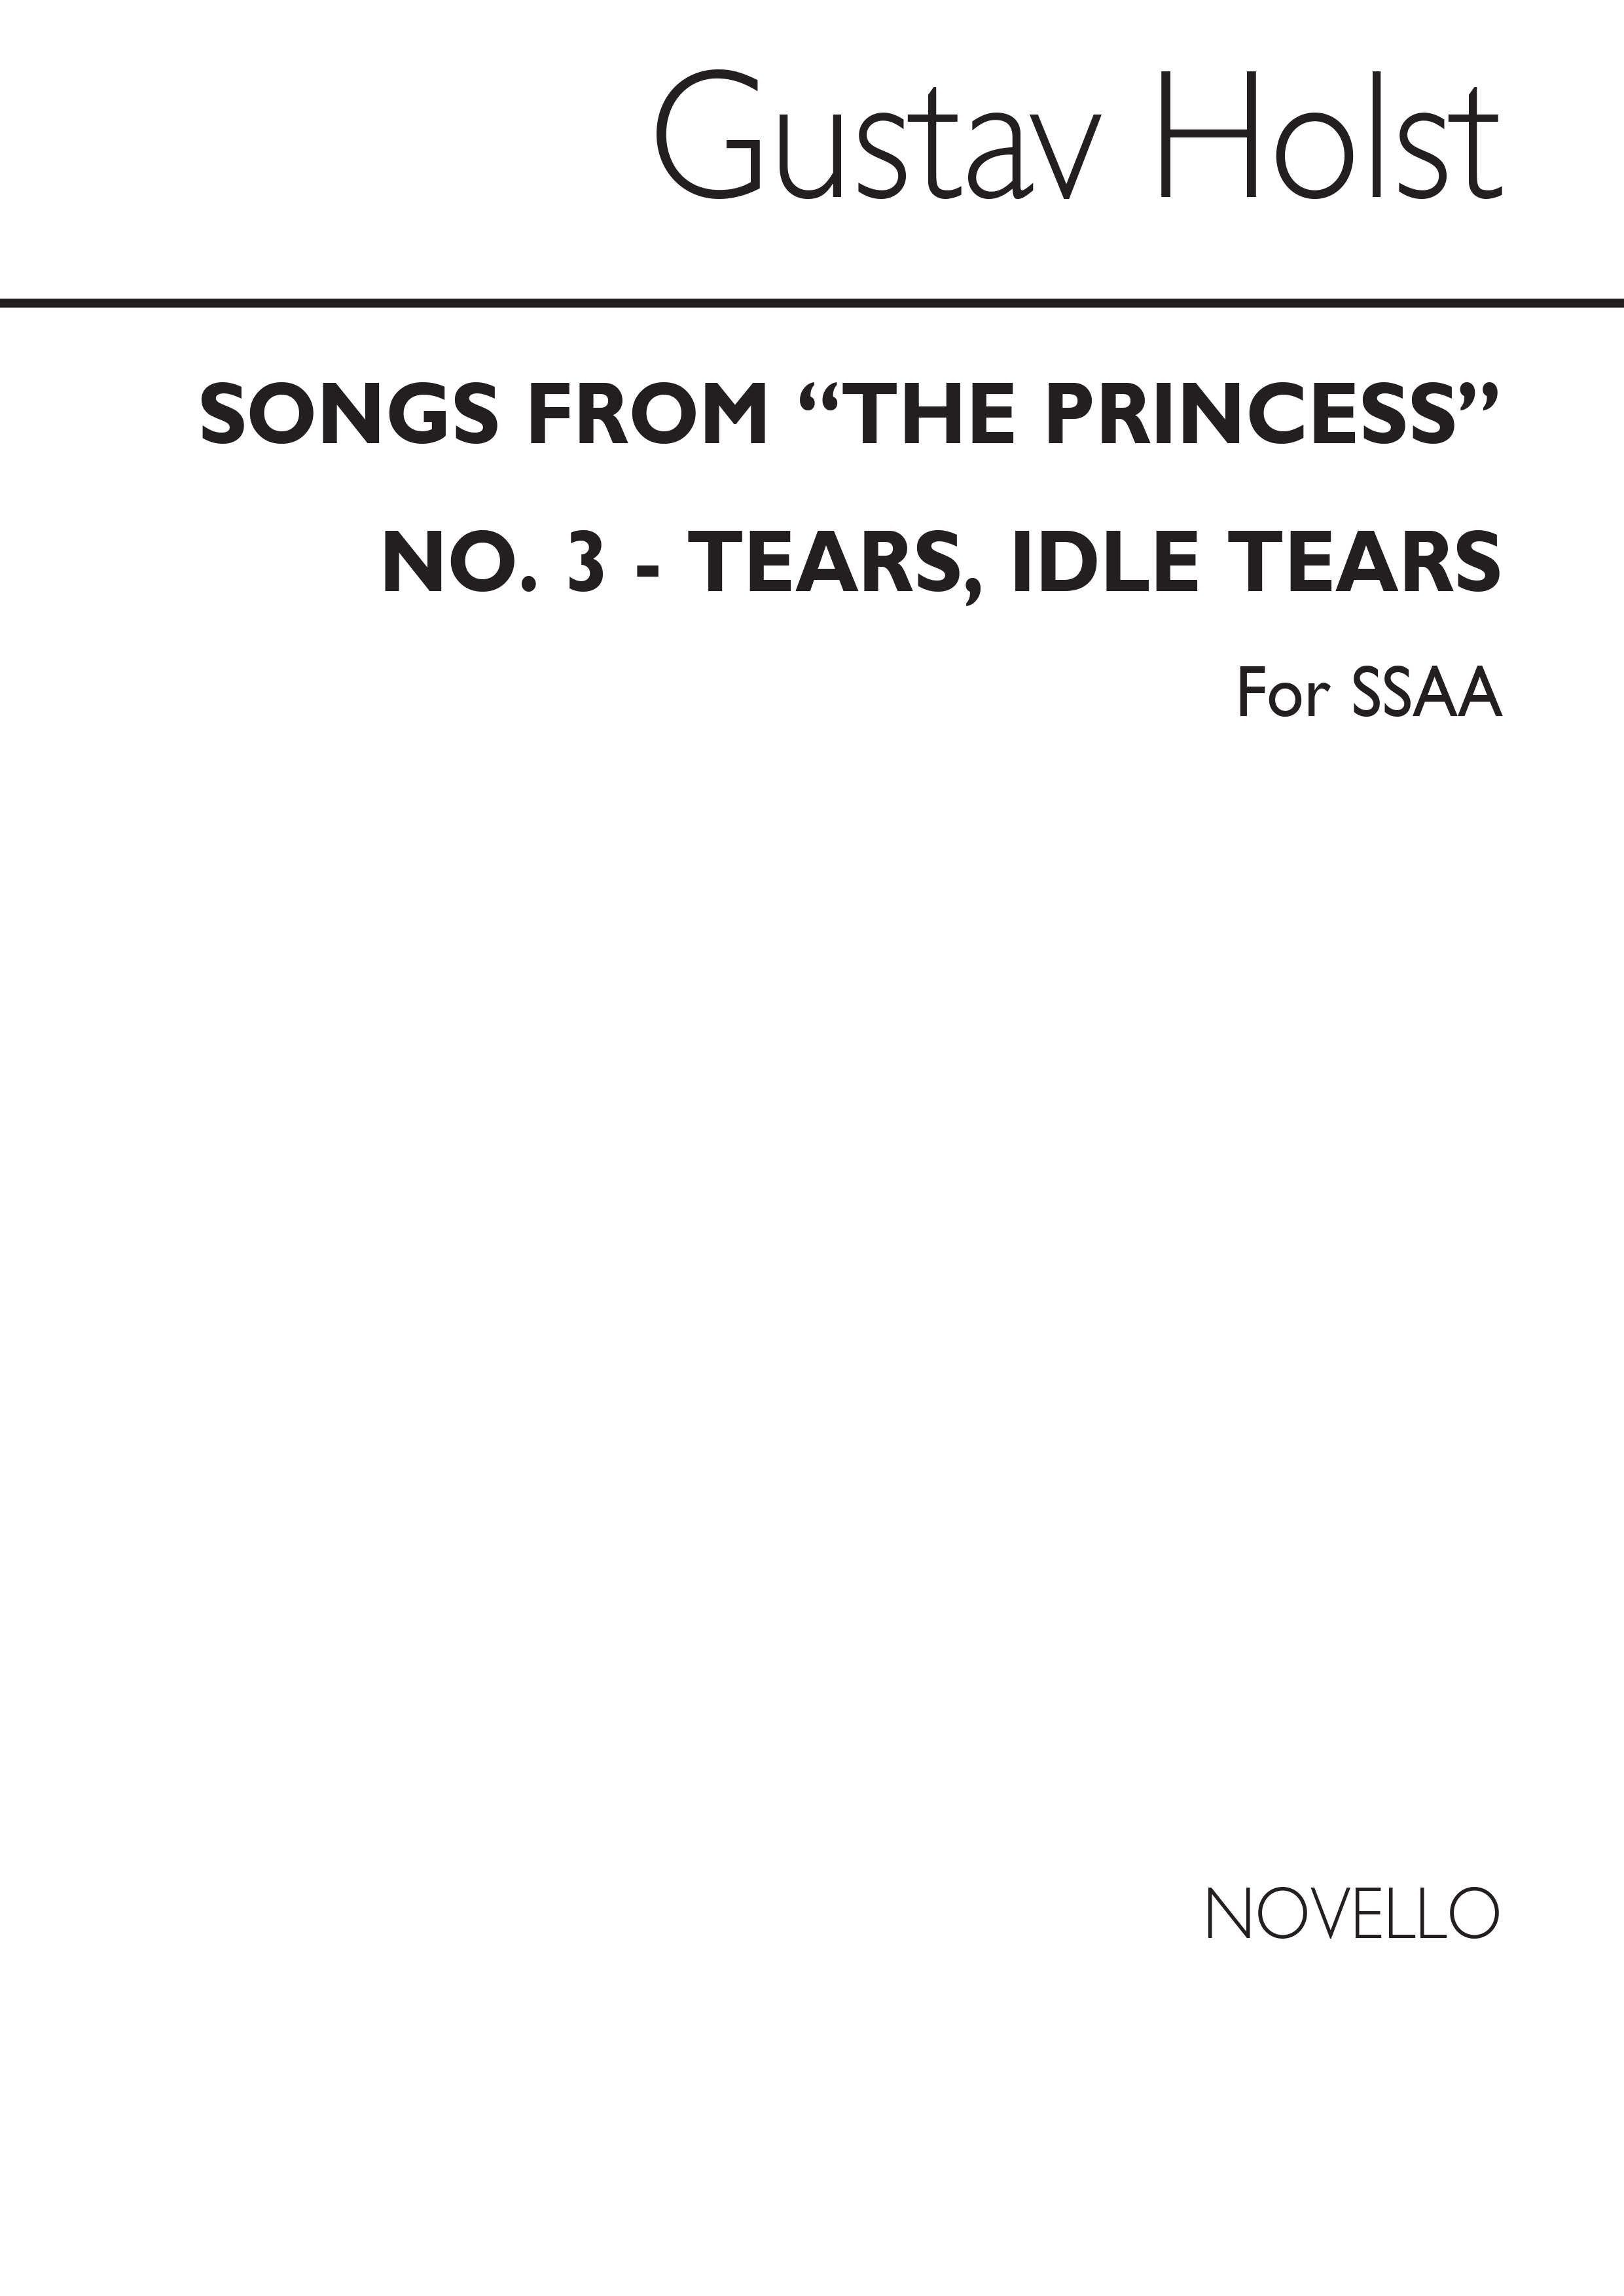 Gustav Holst: Tears Idle Tears From 'Songs From The Princess': SSAA: Vocal Score